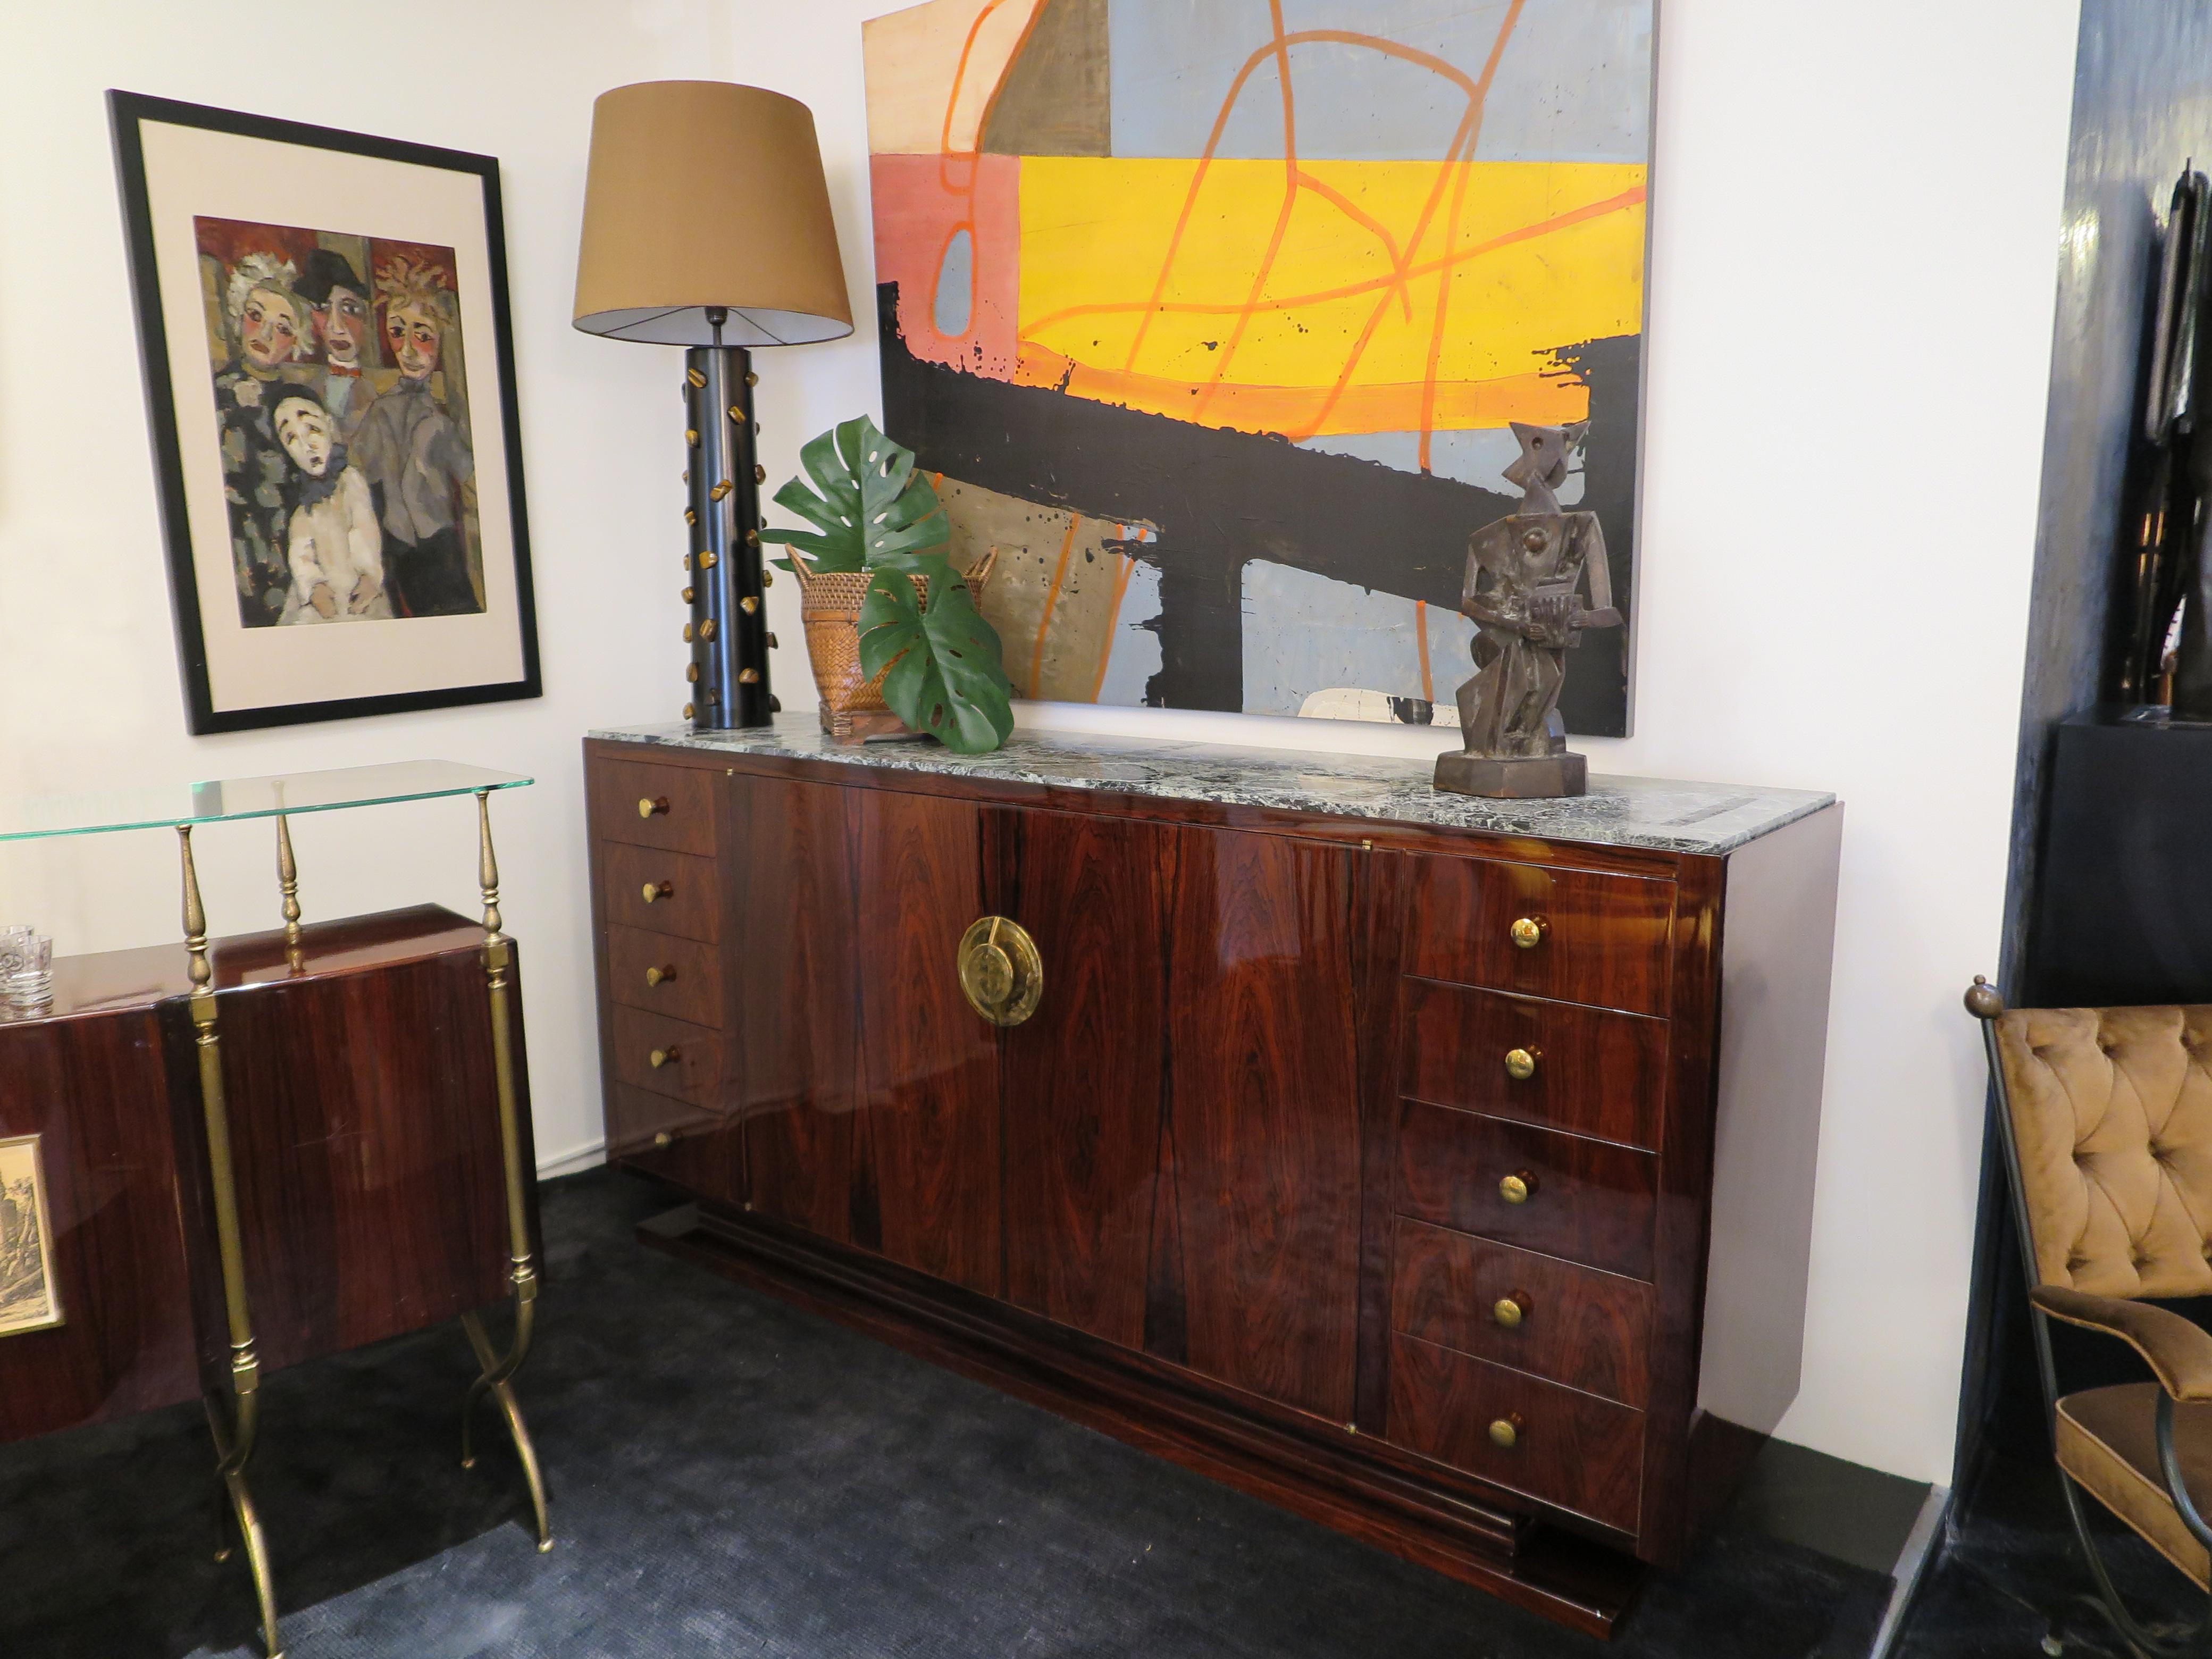 This grand French Art Deco sideboard is crafted in Rosewood and is newly refinished in high gloss. Each side showcases five drawers with two cabinet doors in the center. The middle doors are highlighted by a rounded hardware pull in brass. The base